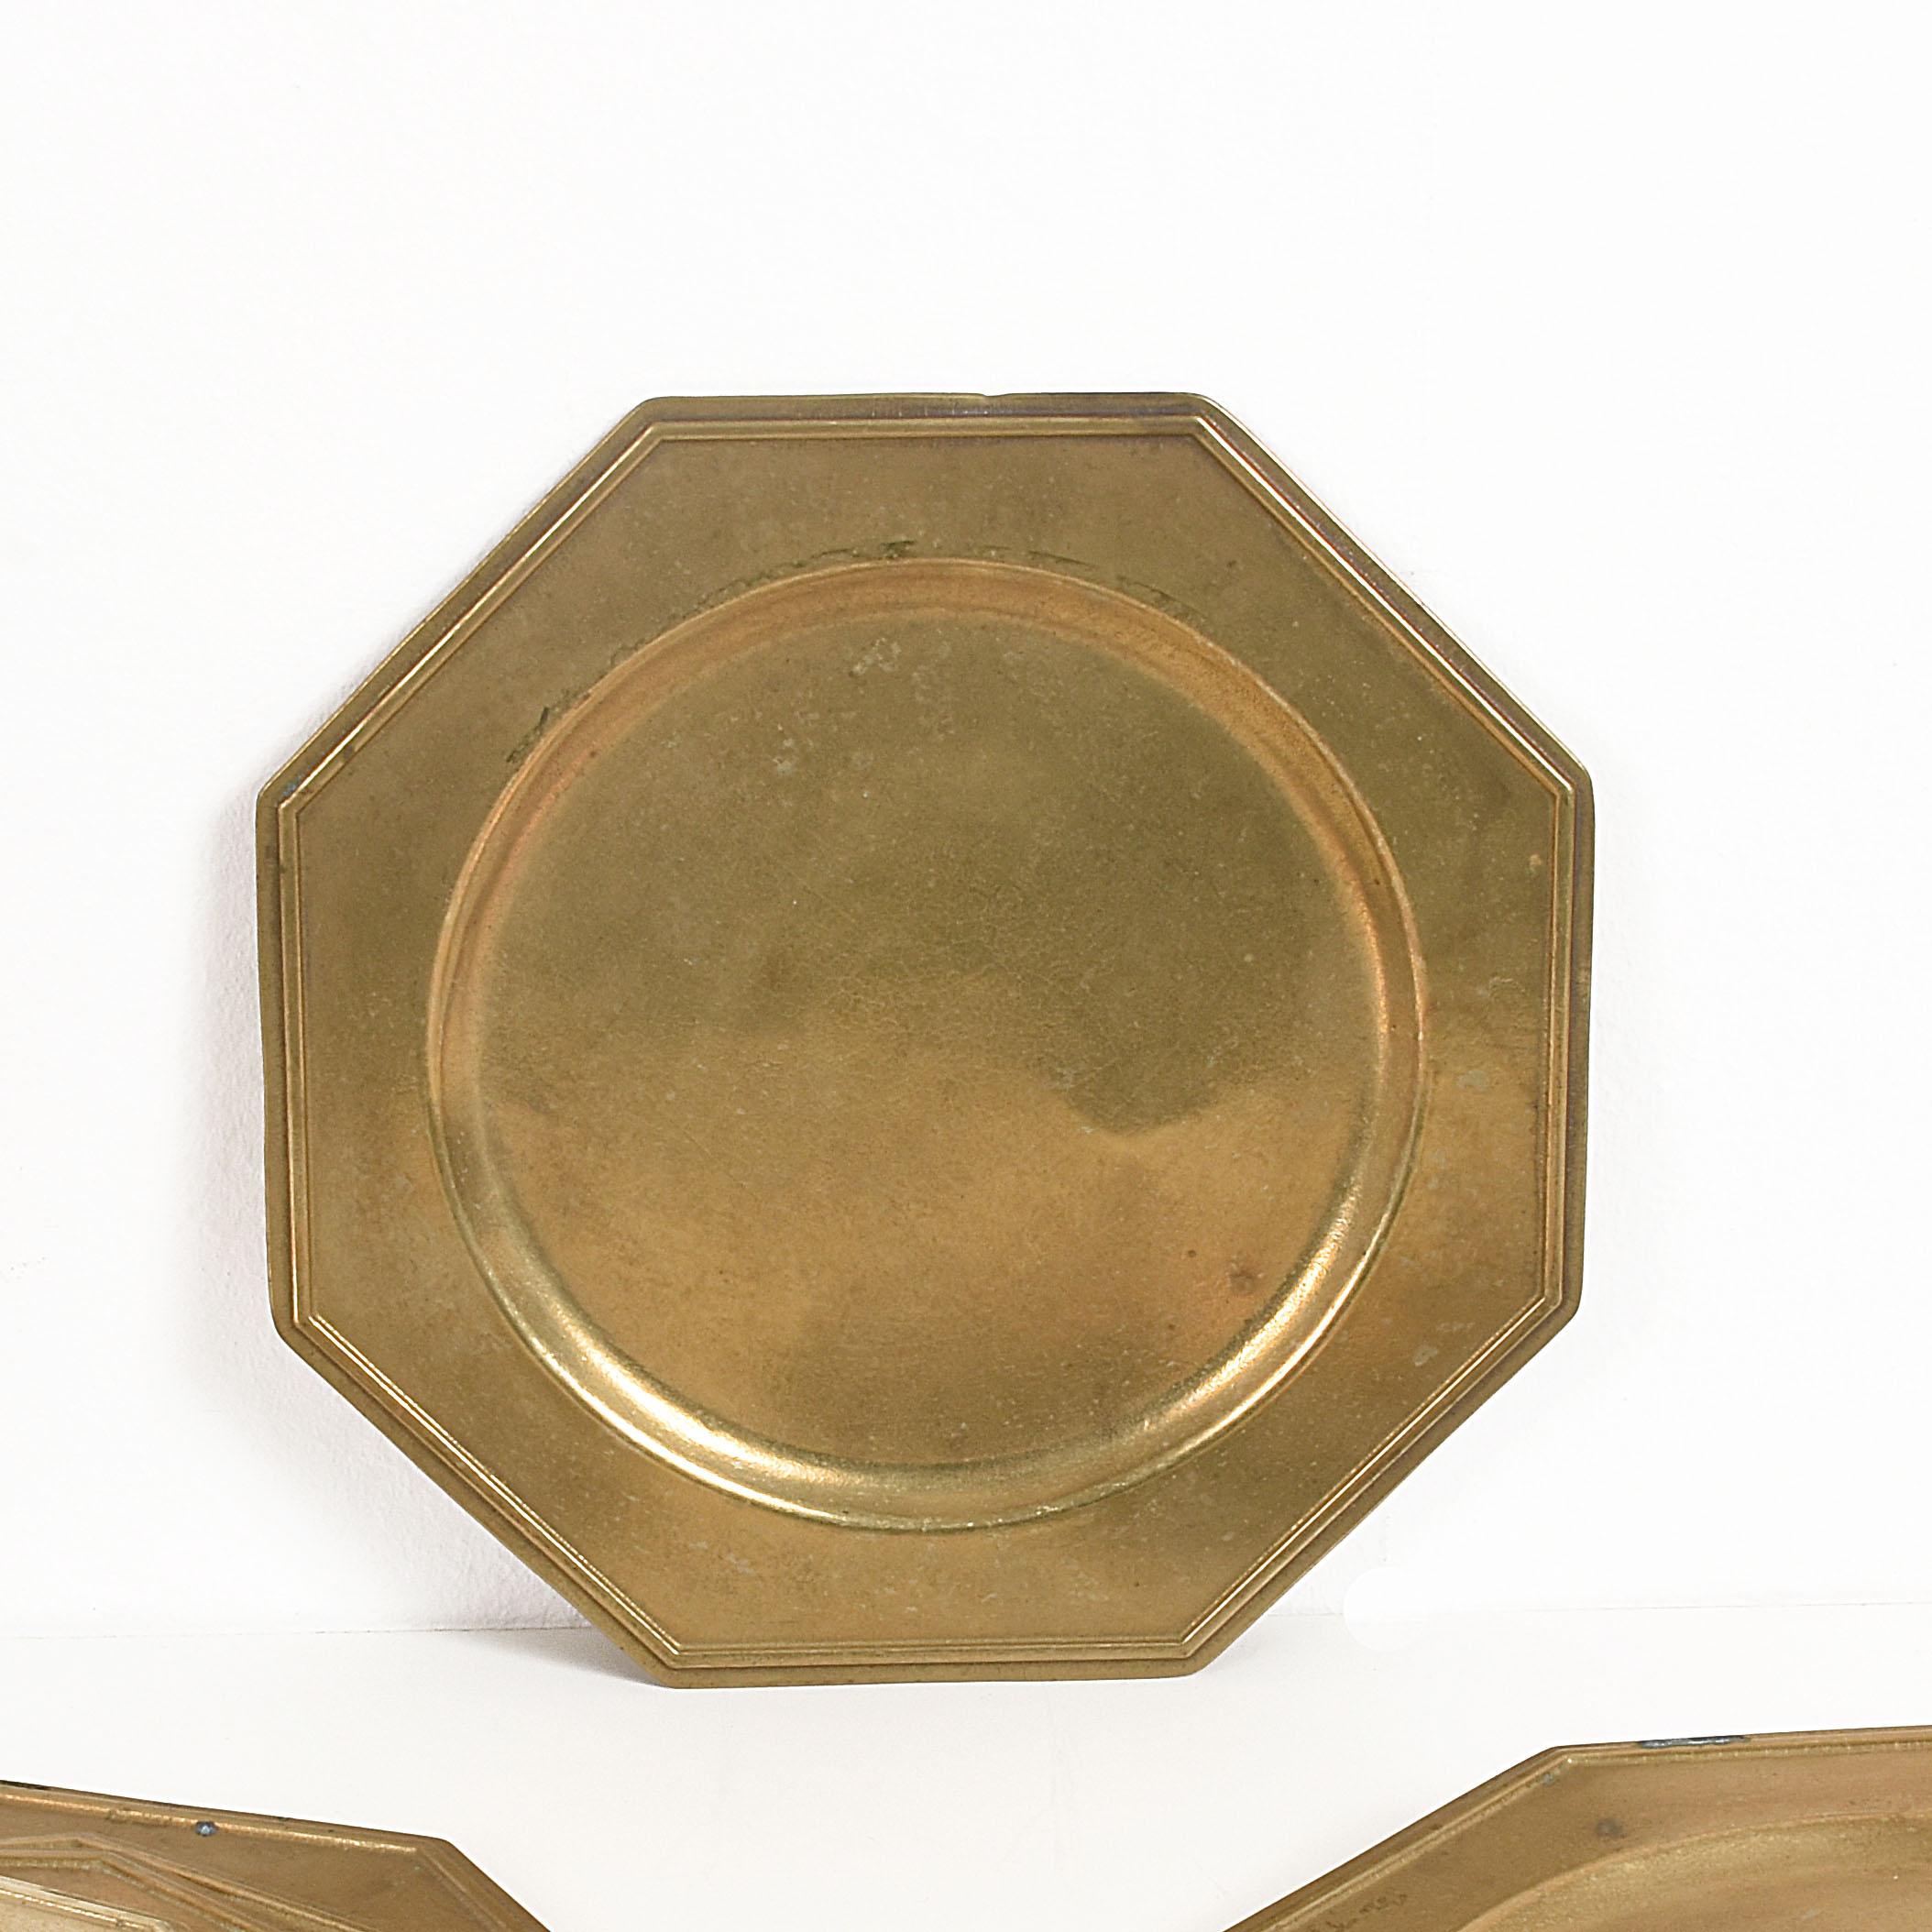 Whether you are preparing your table for a formal or informal occasion, the service dishes offer the Hostess the opportunity to create the atmosphere for the table decor. These beautiful octagonal plates are always larger than the dishes that will